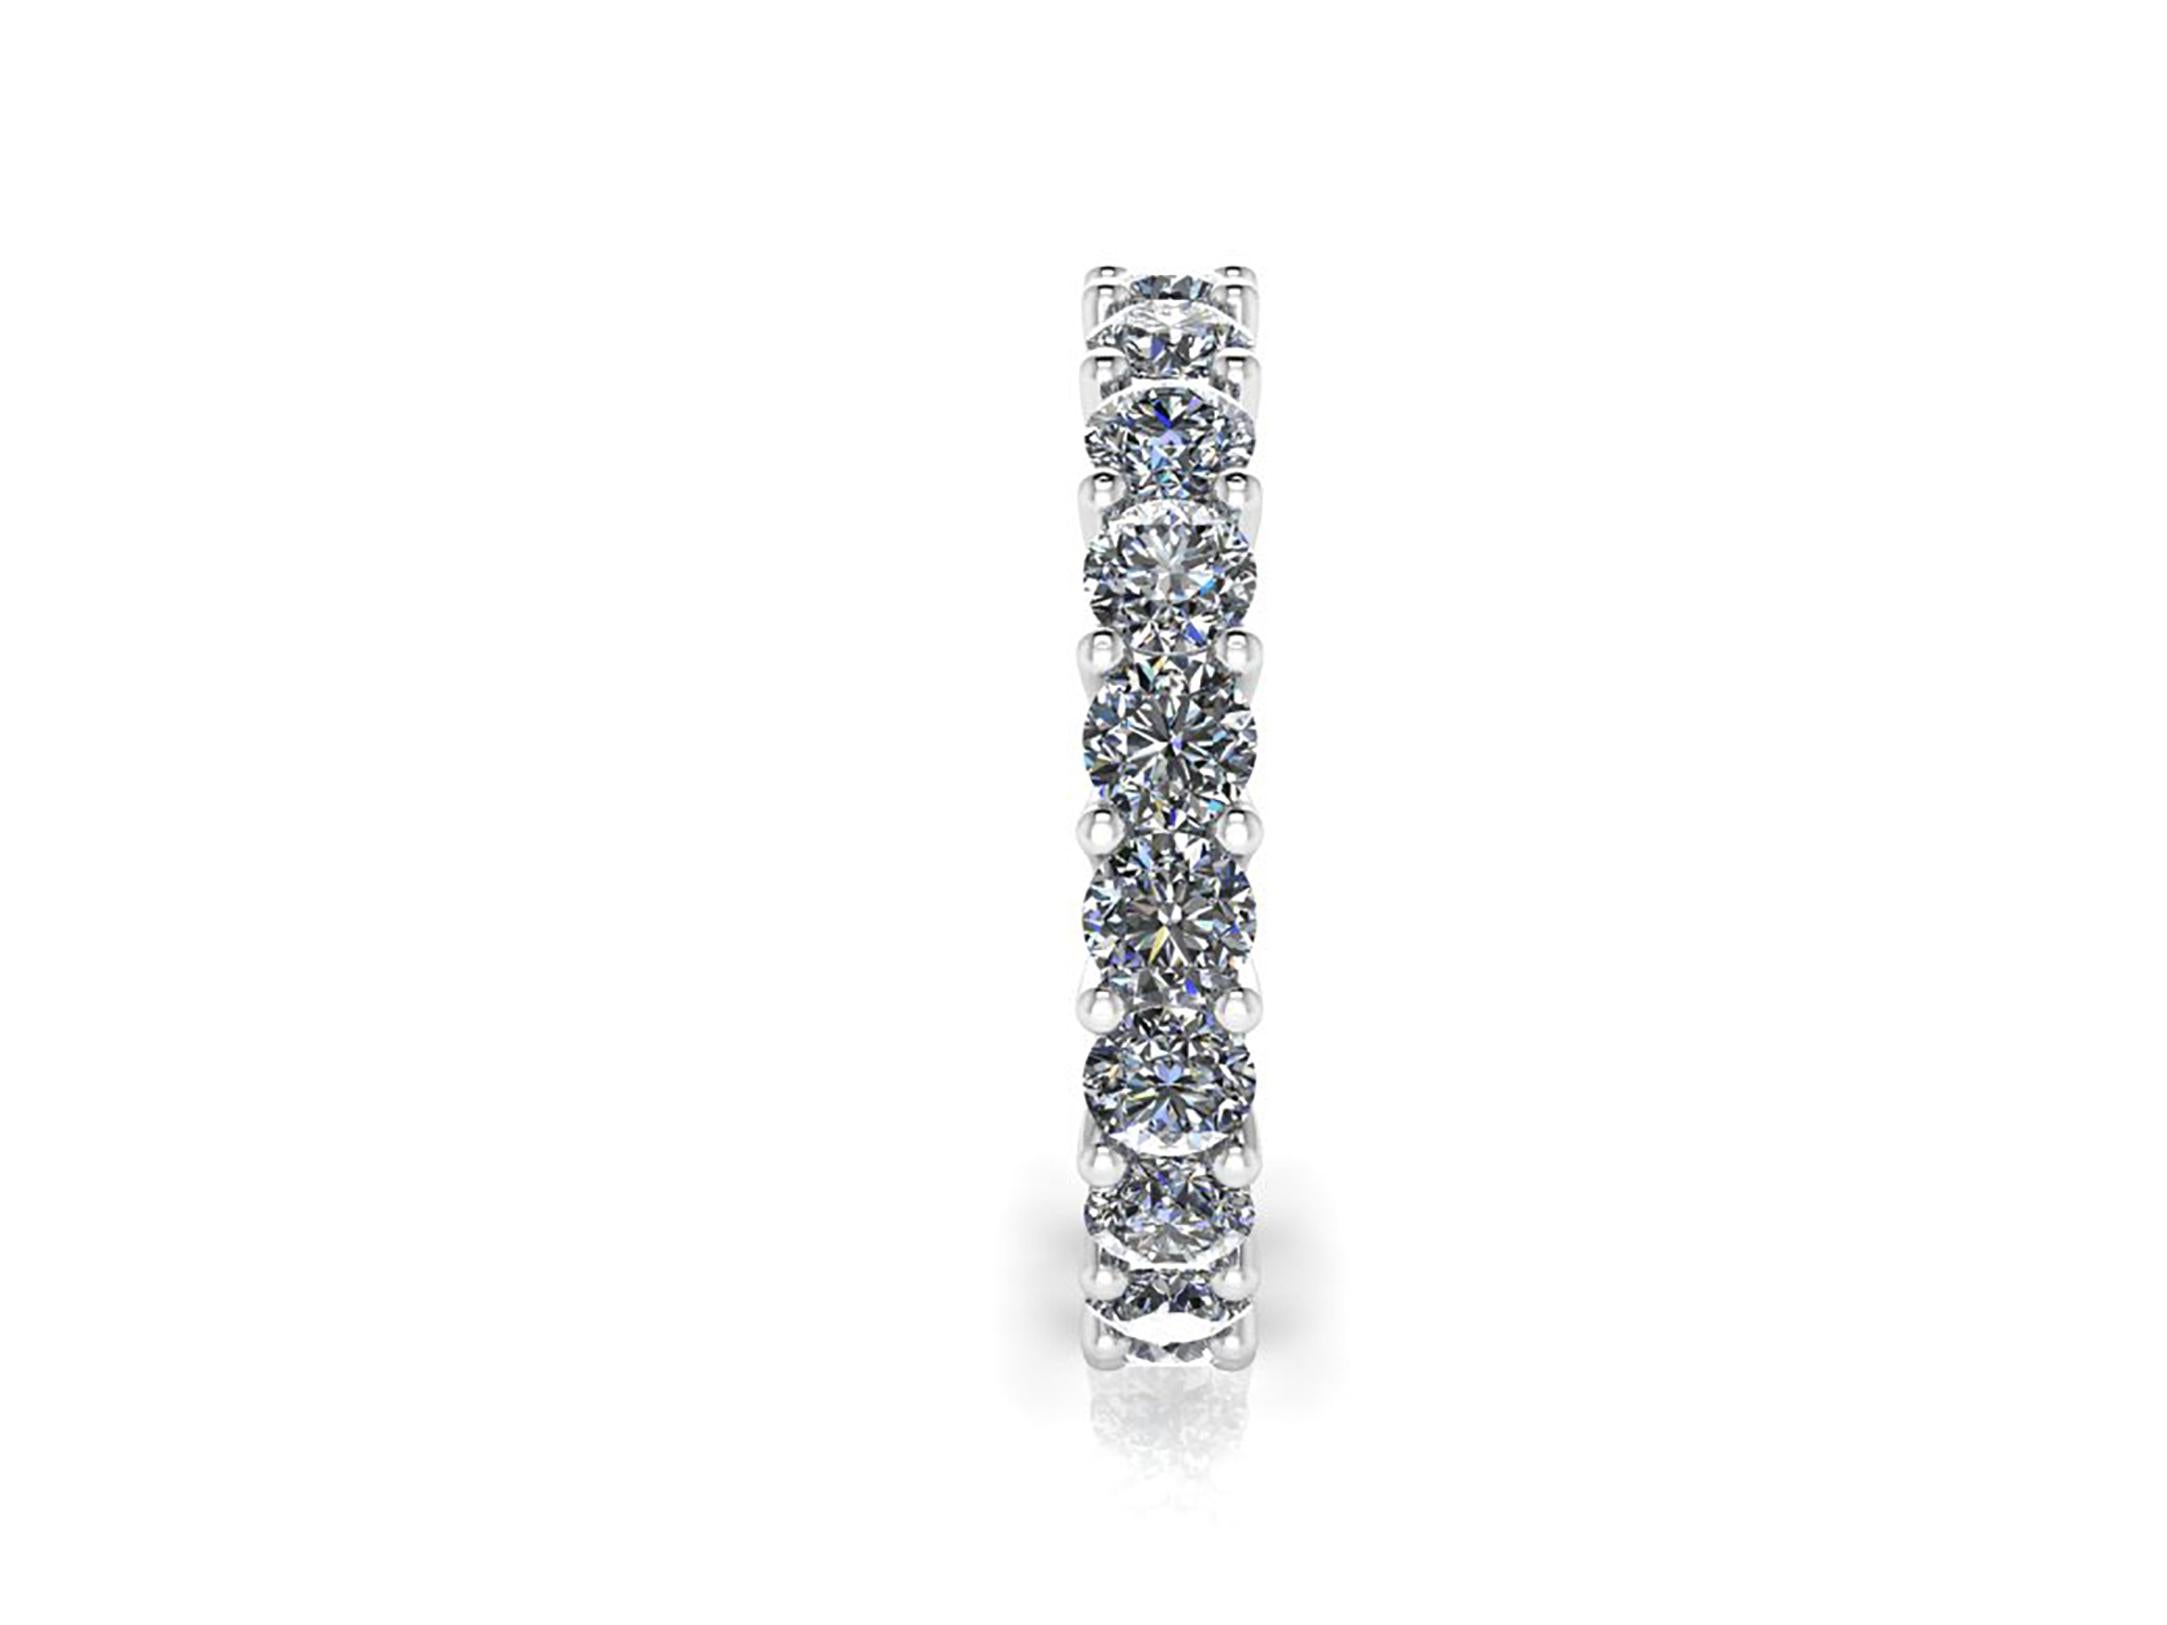 Modern 2.5 Carat White Diamonds Stackable Eternity Ring Platinum 950 For Sale